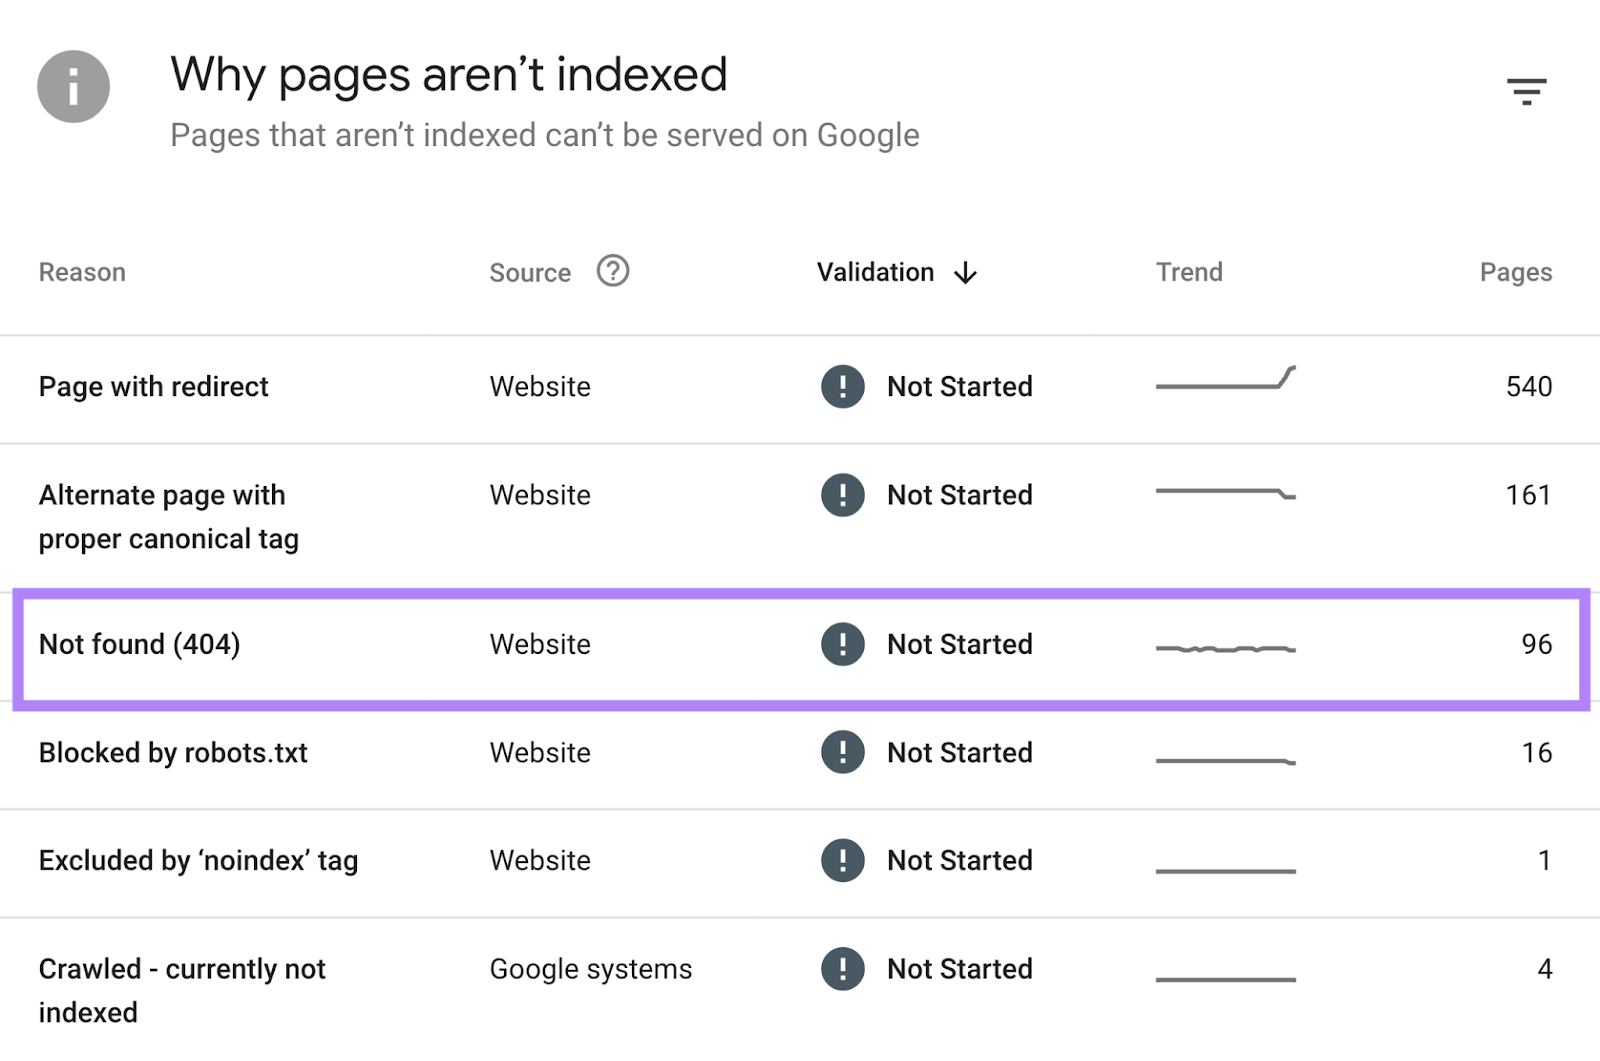 “Why pages aren’t indexed” section of the "Page Indexing" report